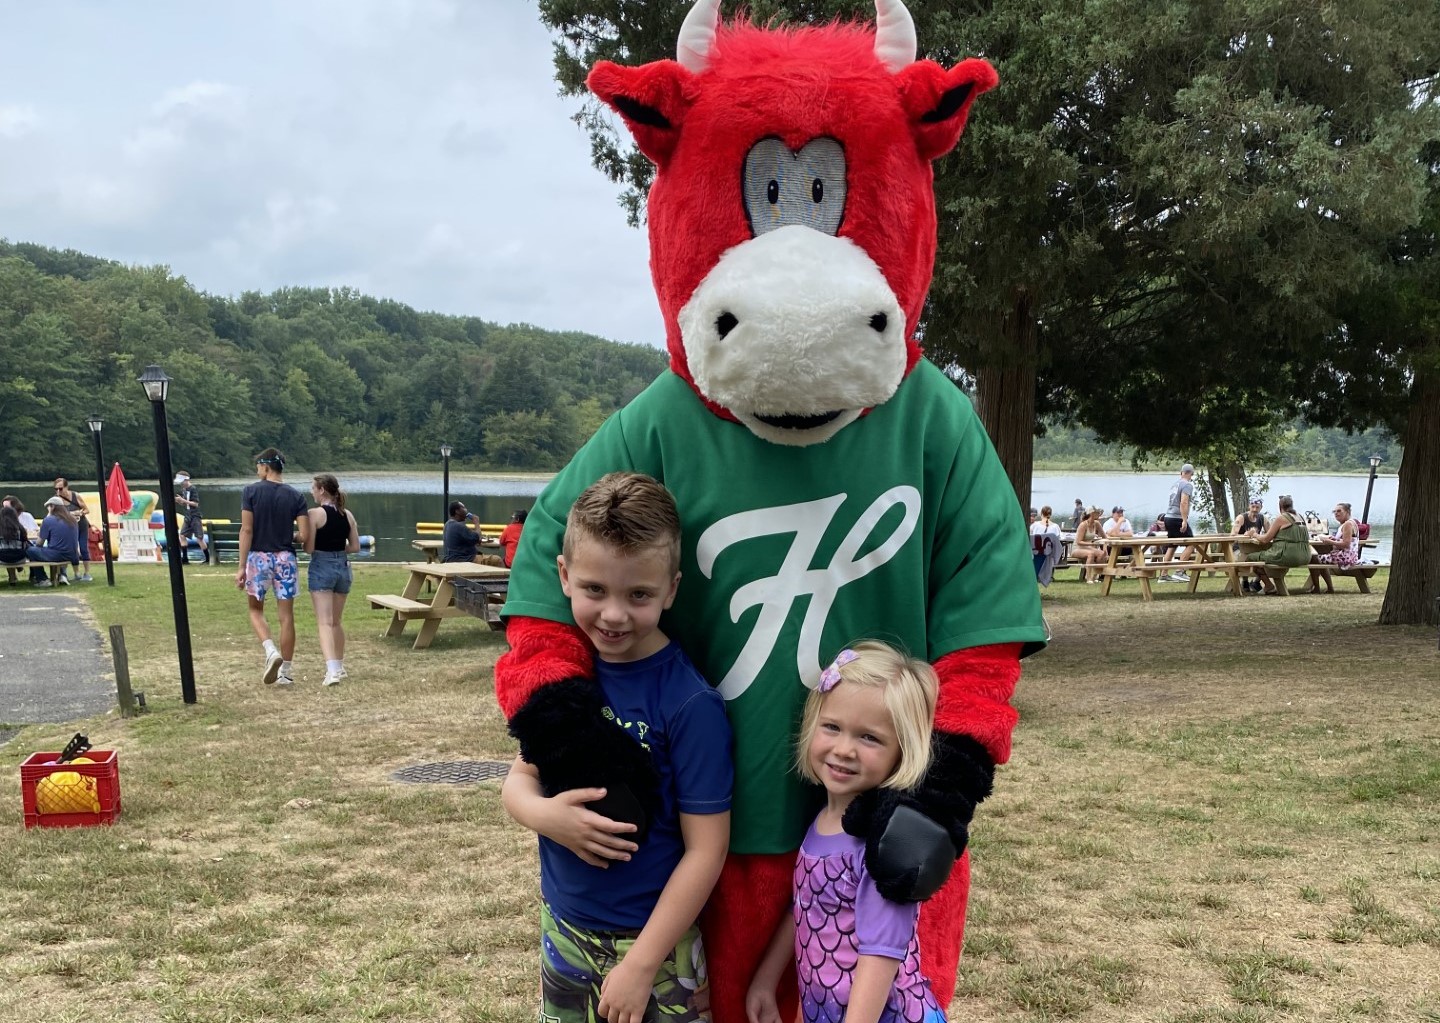 Heritage’s Company Picnic – A Magical Day of Gratitude